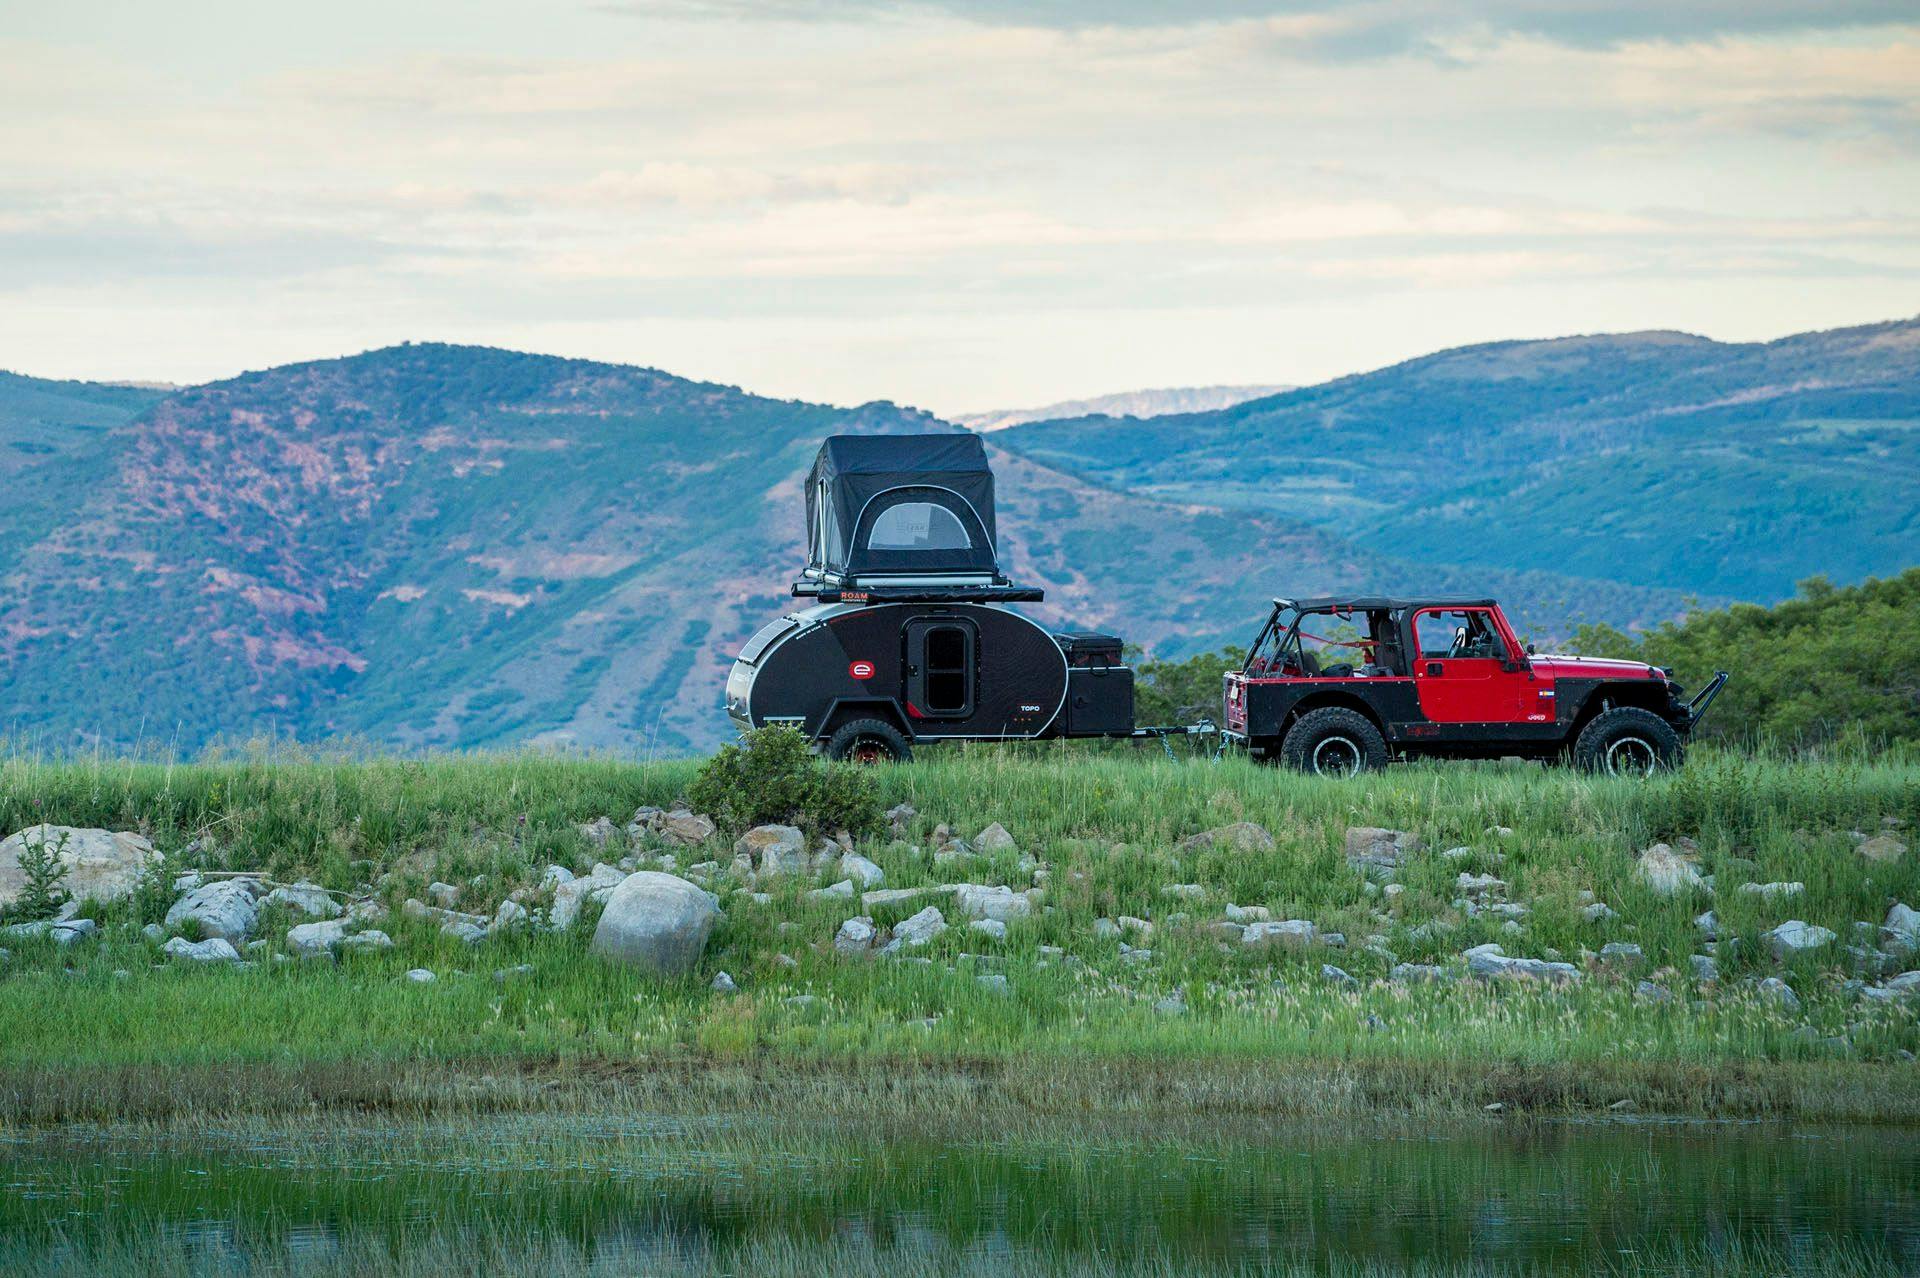 A teardrop trailer being towed by a red JEEP.